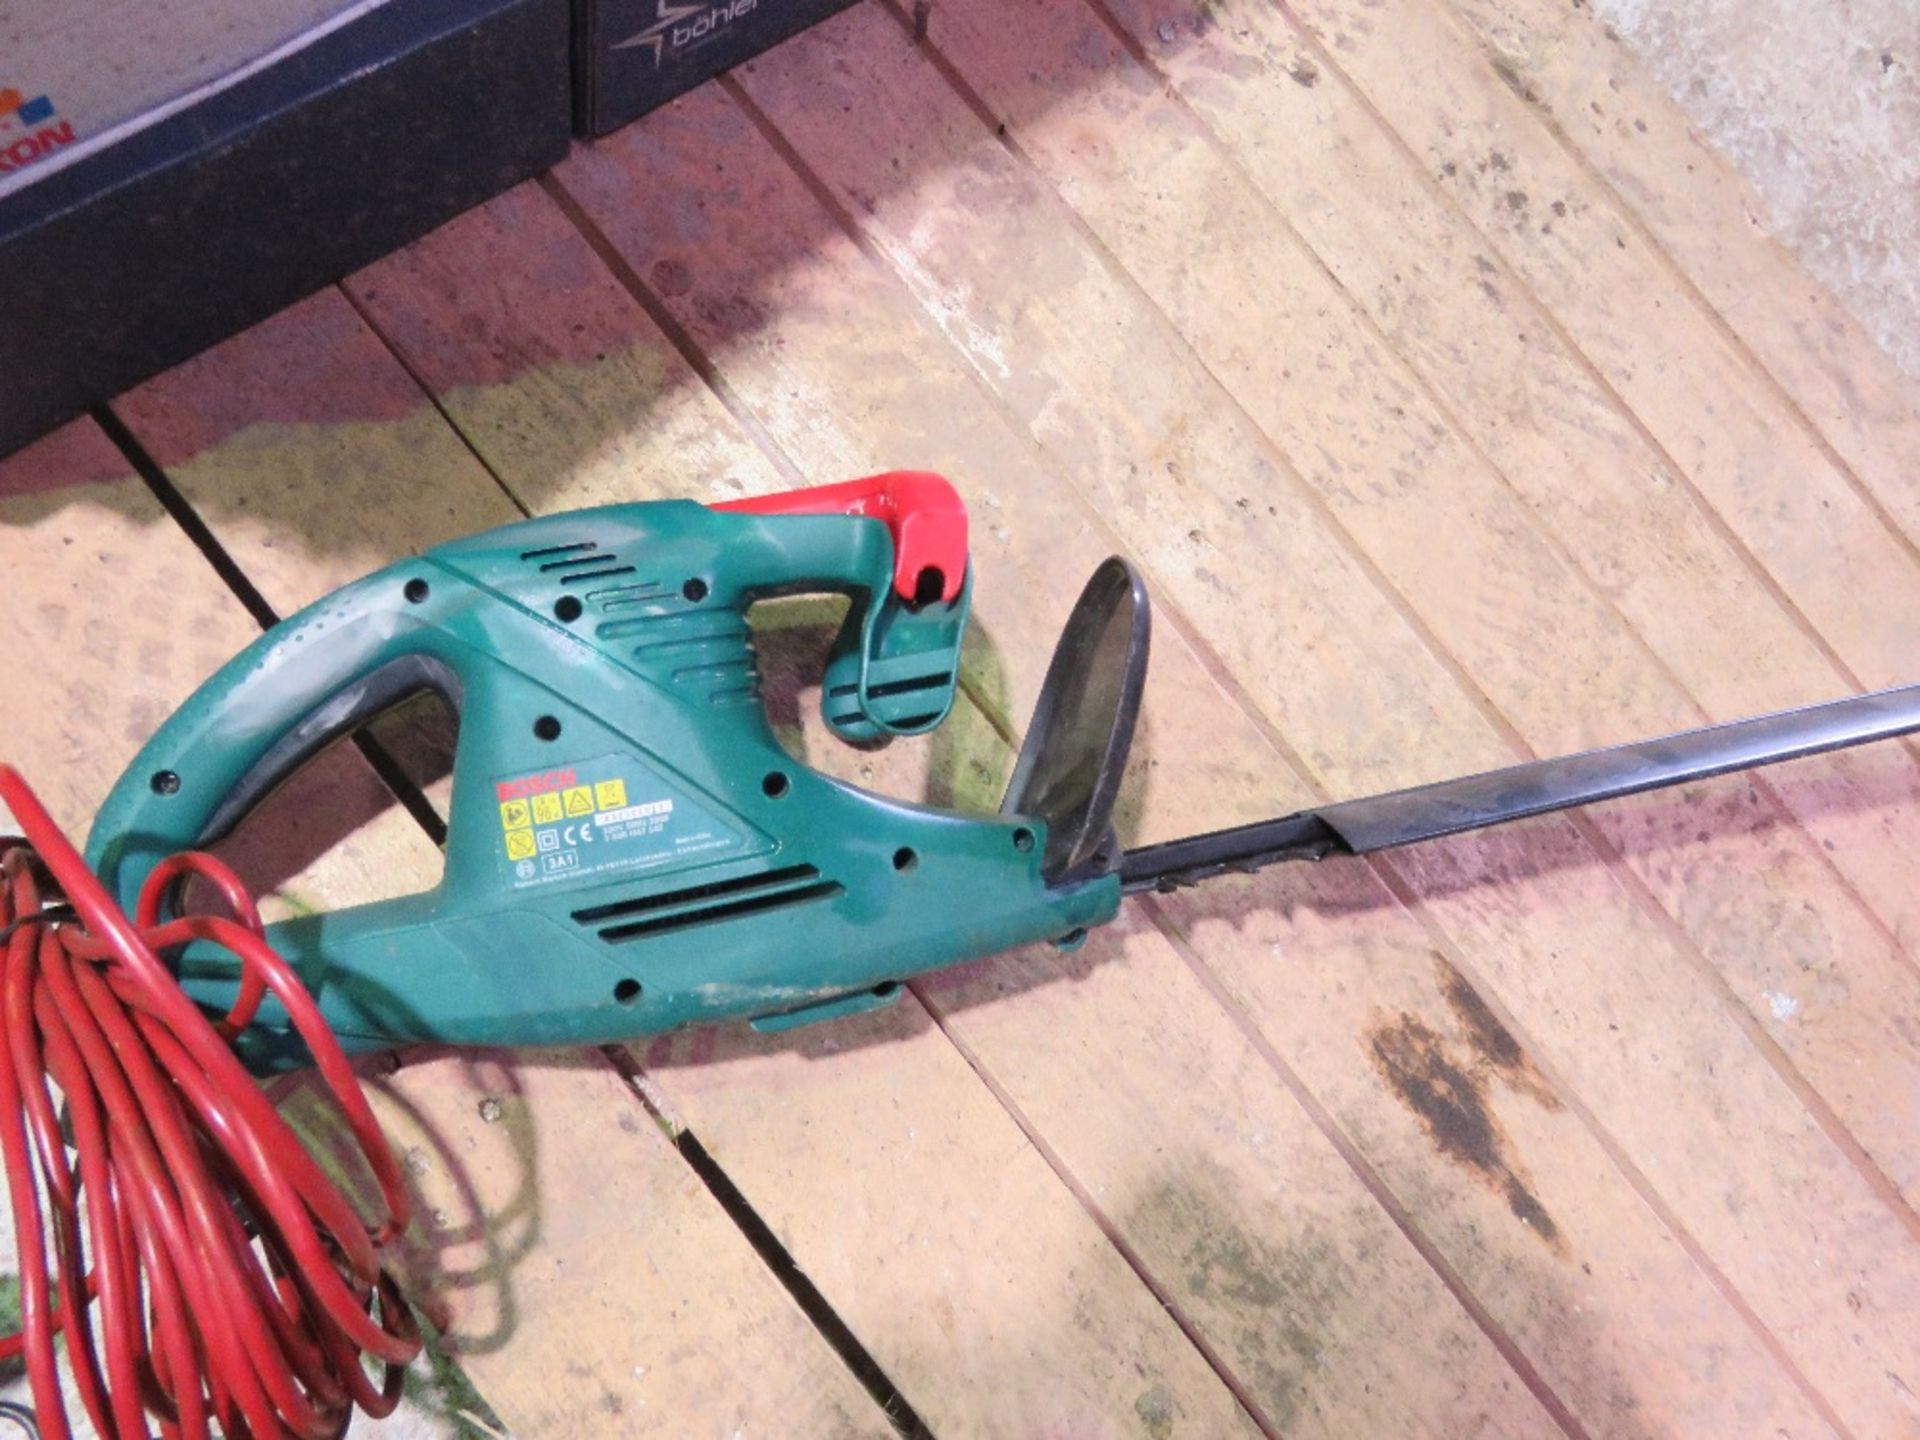 2 X PETROL HEDGE CUTTERS PLUS 2 X ELECTRIC HEDGE CUTTERS AND A CHAINSAW SHARPENER. - Image 11 of 14